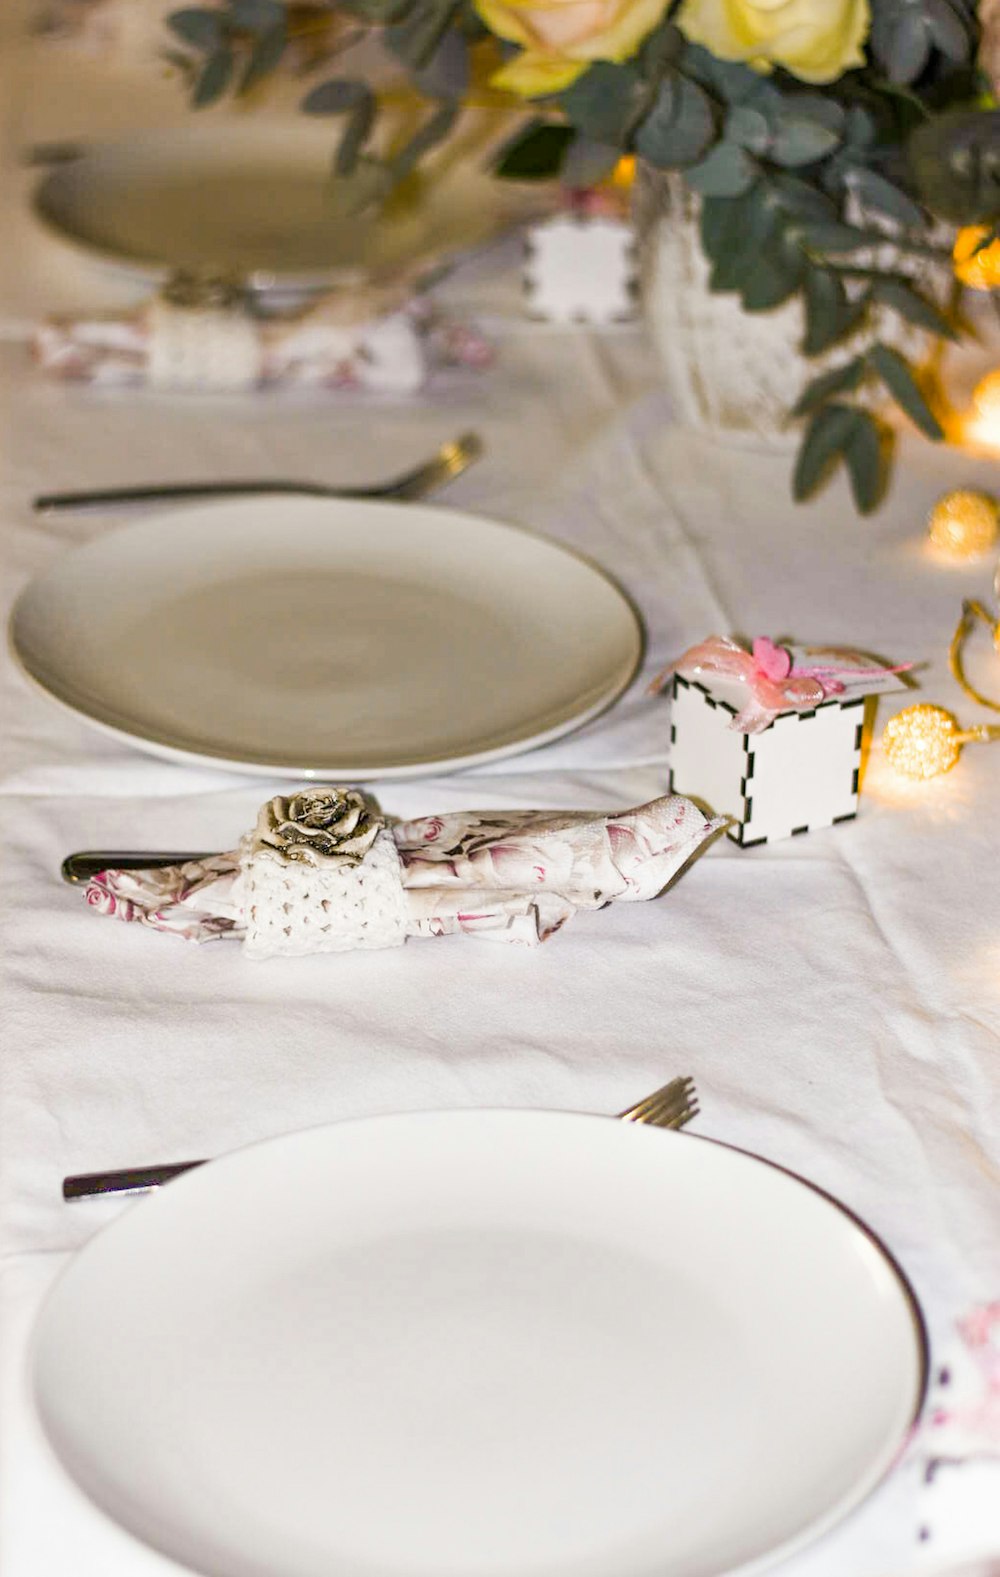 white ceramic plate on table